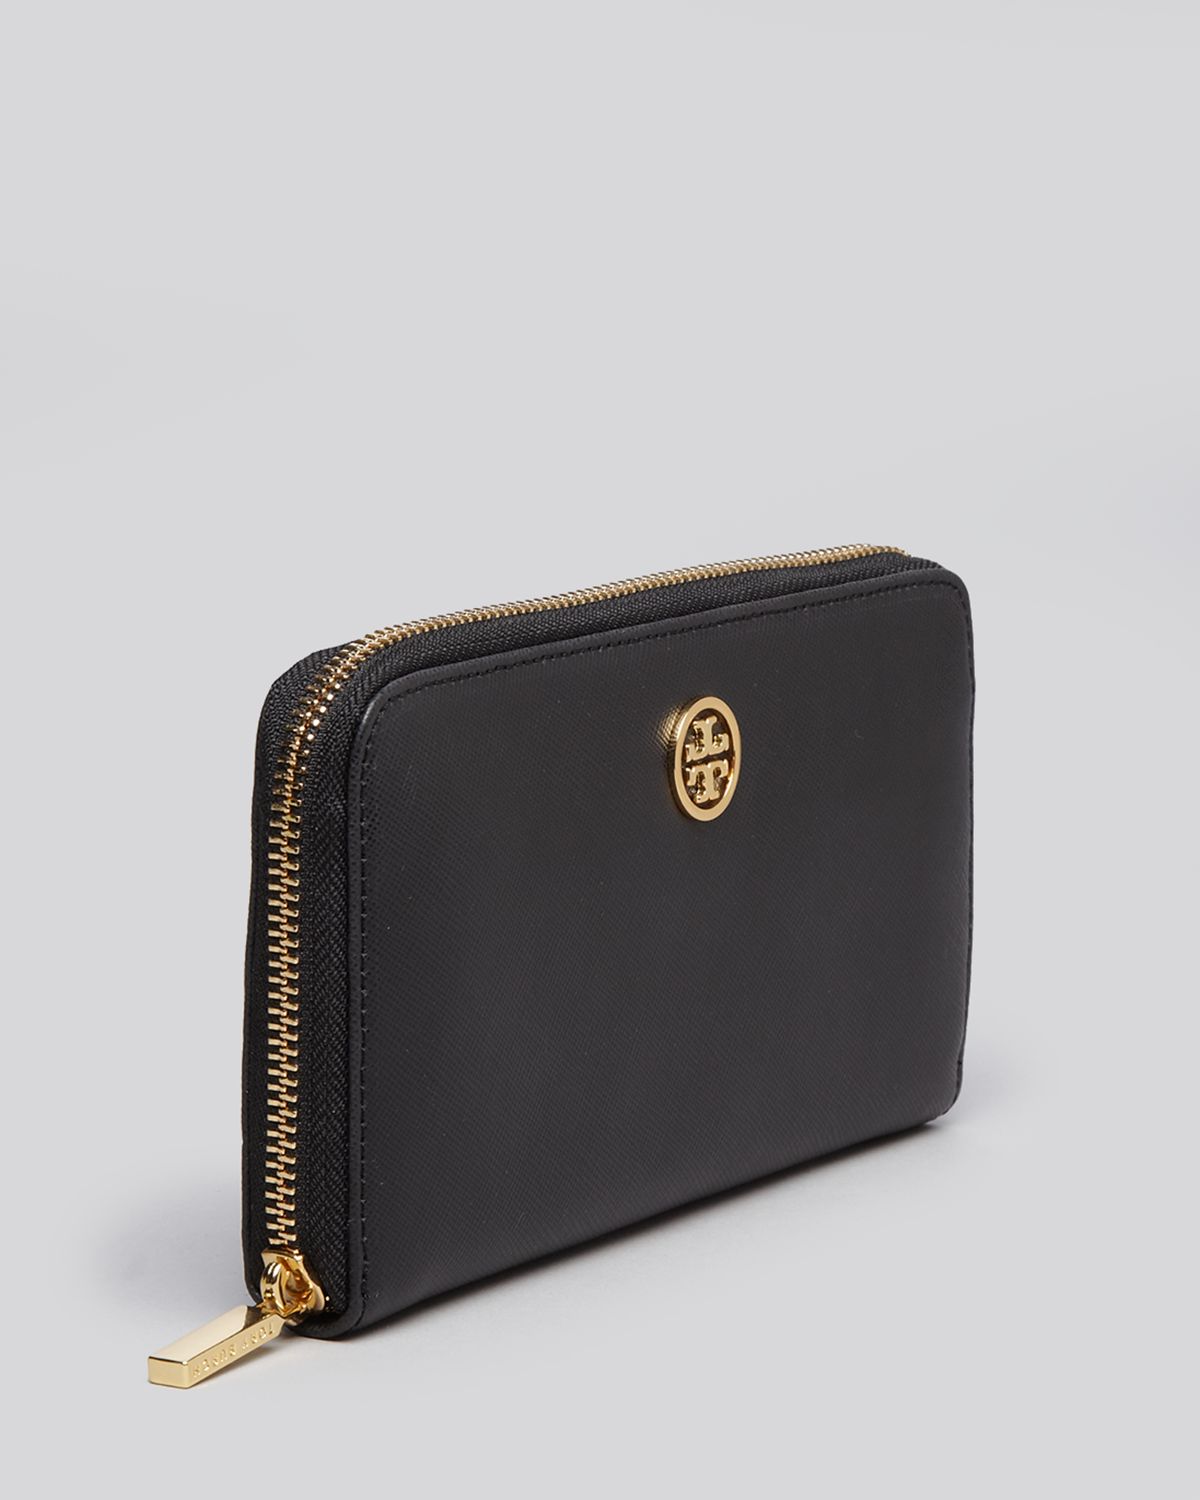 Tory Burch Robinson Passport Black Royal Navy Textured Leather Continental  Wallet 